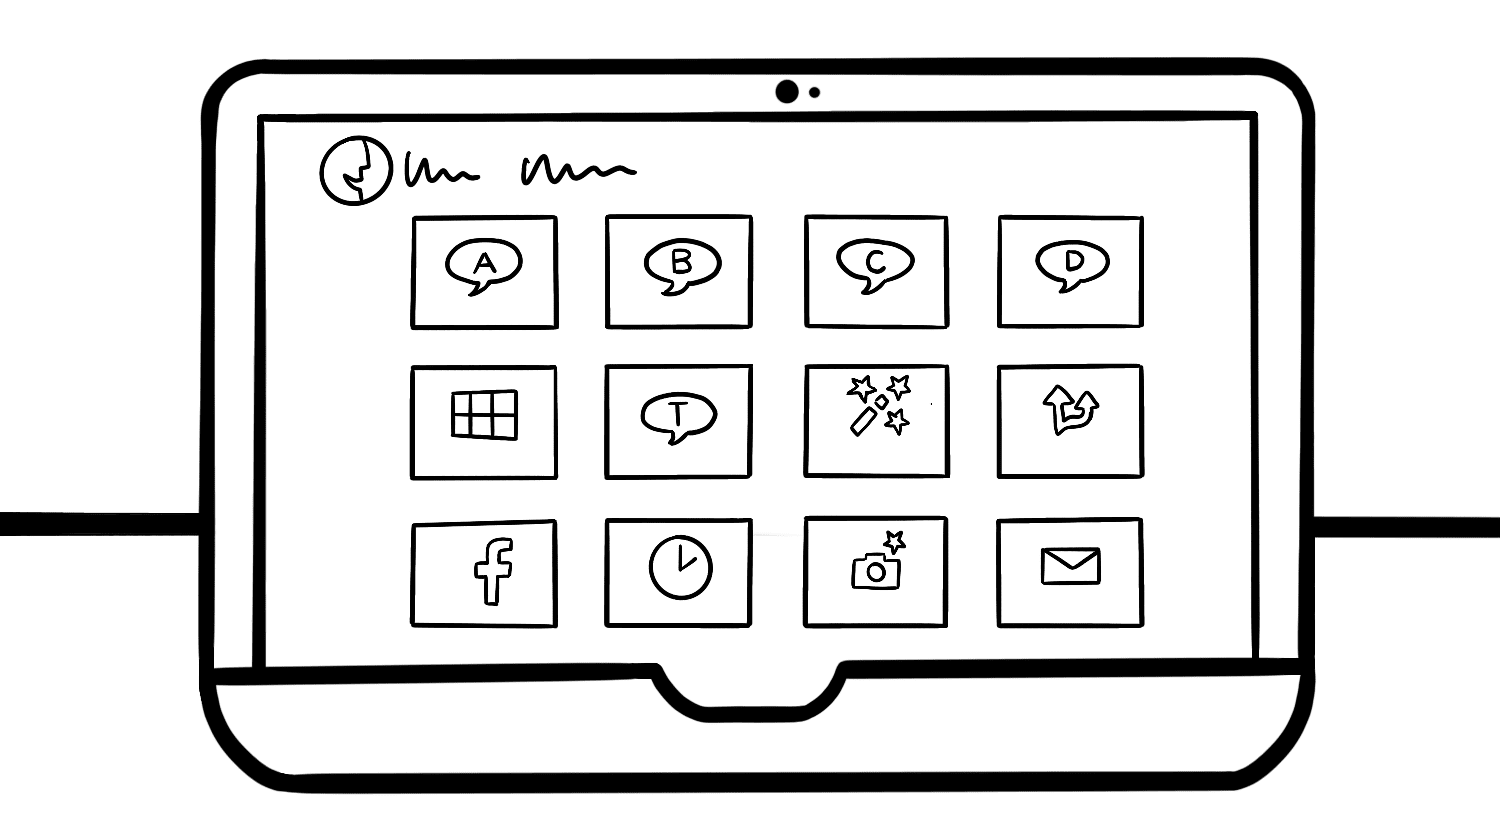 Illustration: A laptop displays Grid3 control options for computer navigation. Twelve icons are featured that range from speech commands to web shortcuts.